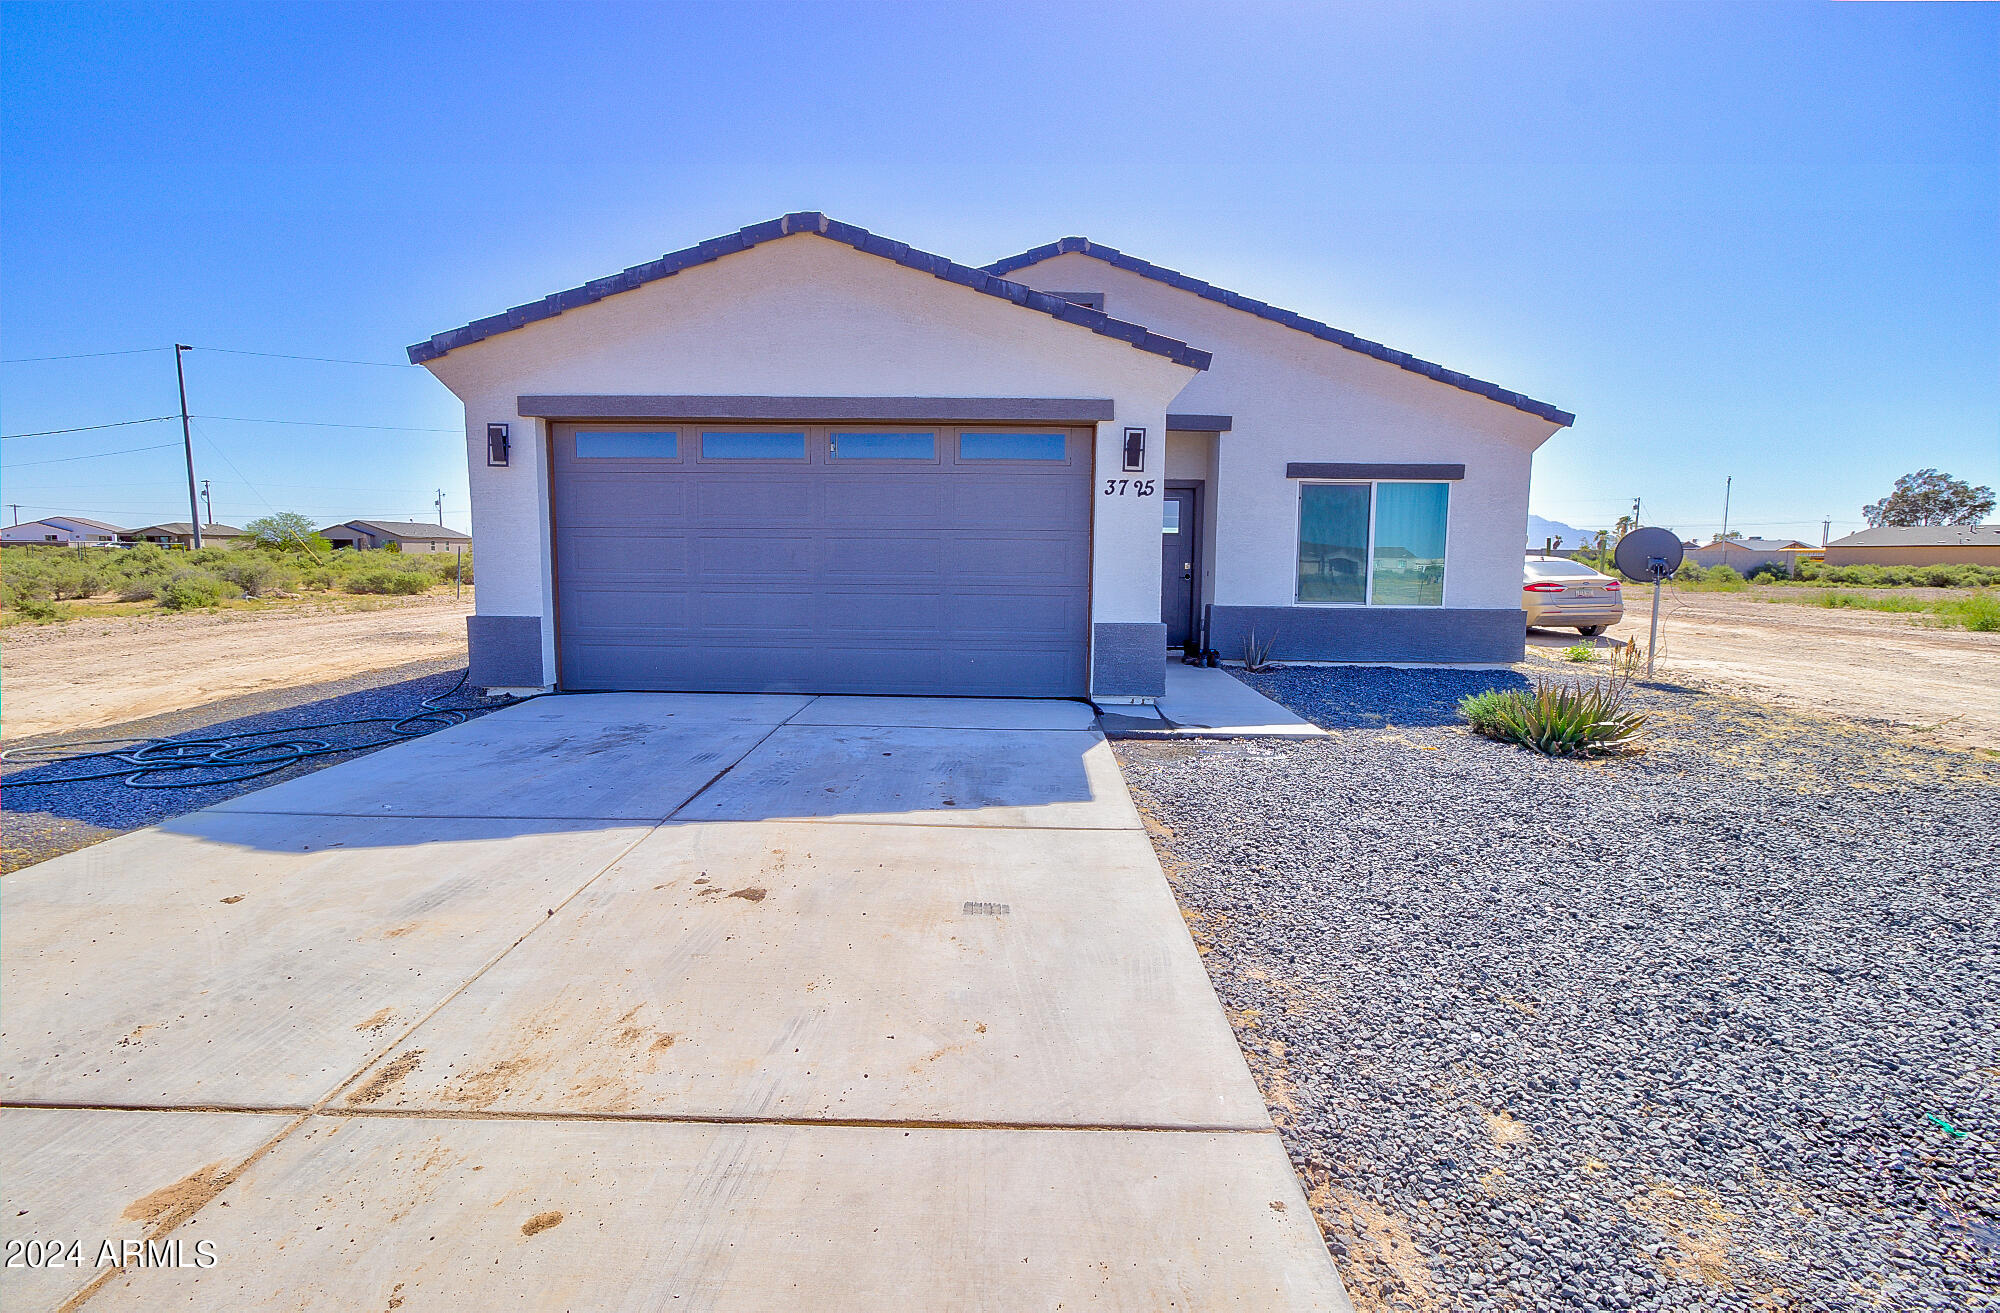 Photo 1 of 17 of 3725 N BANDELIER Drive house